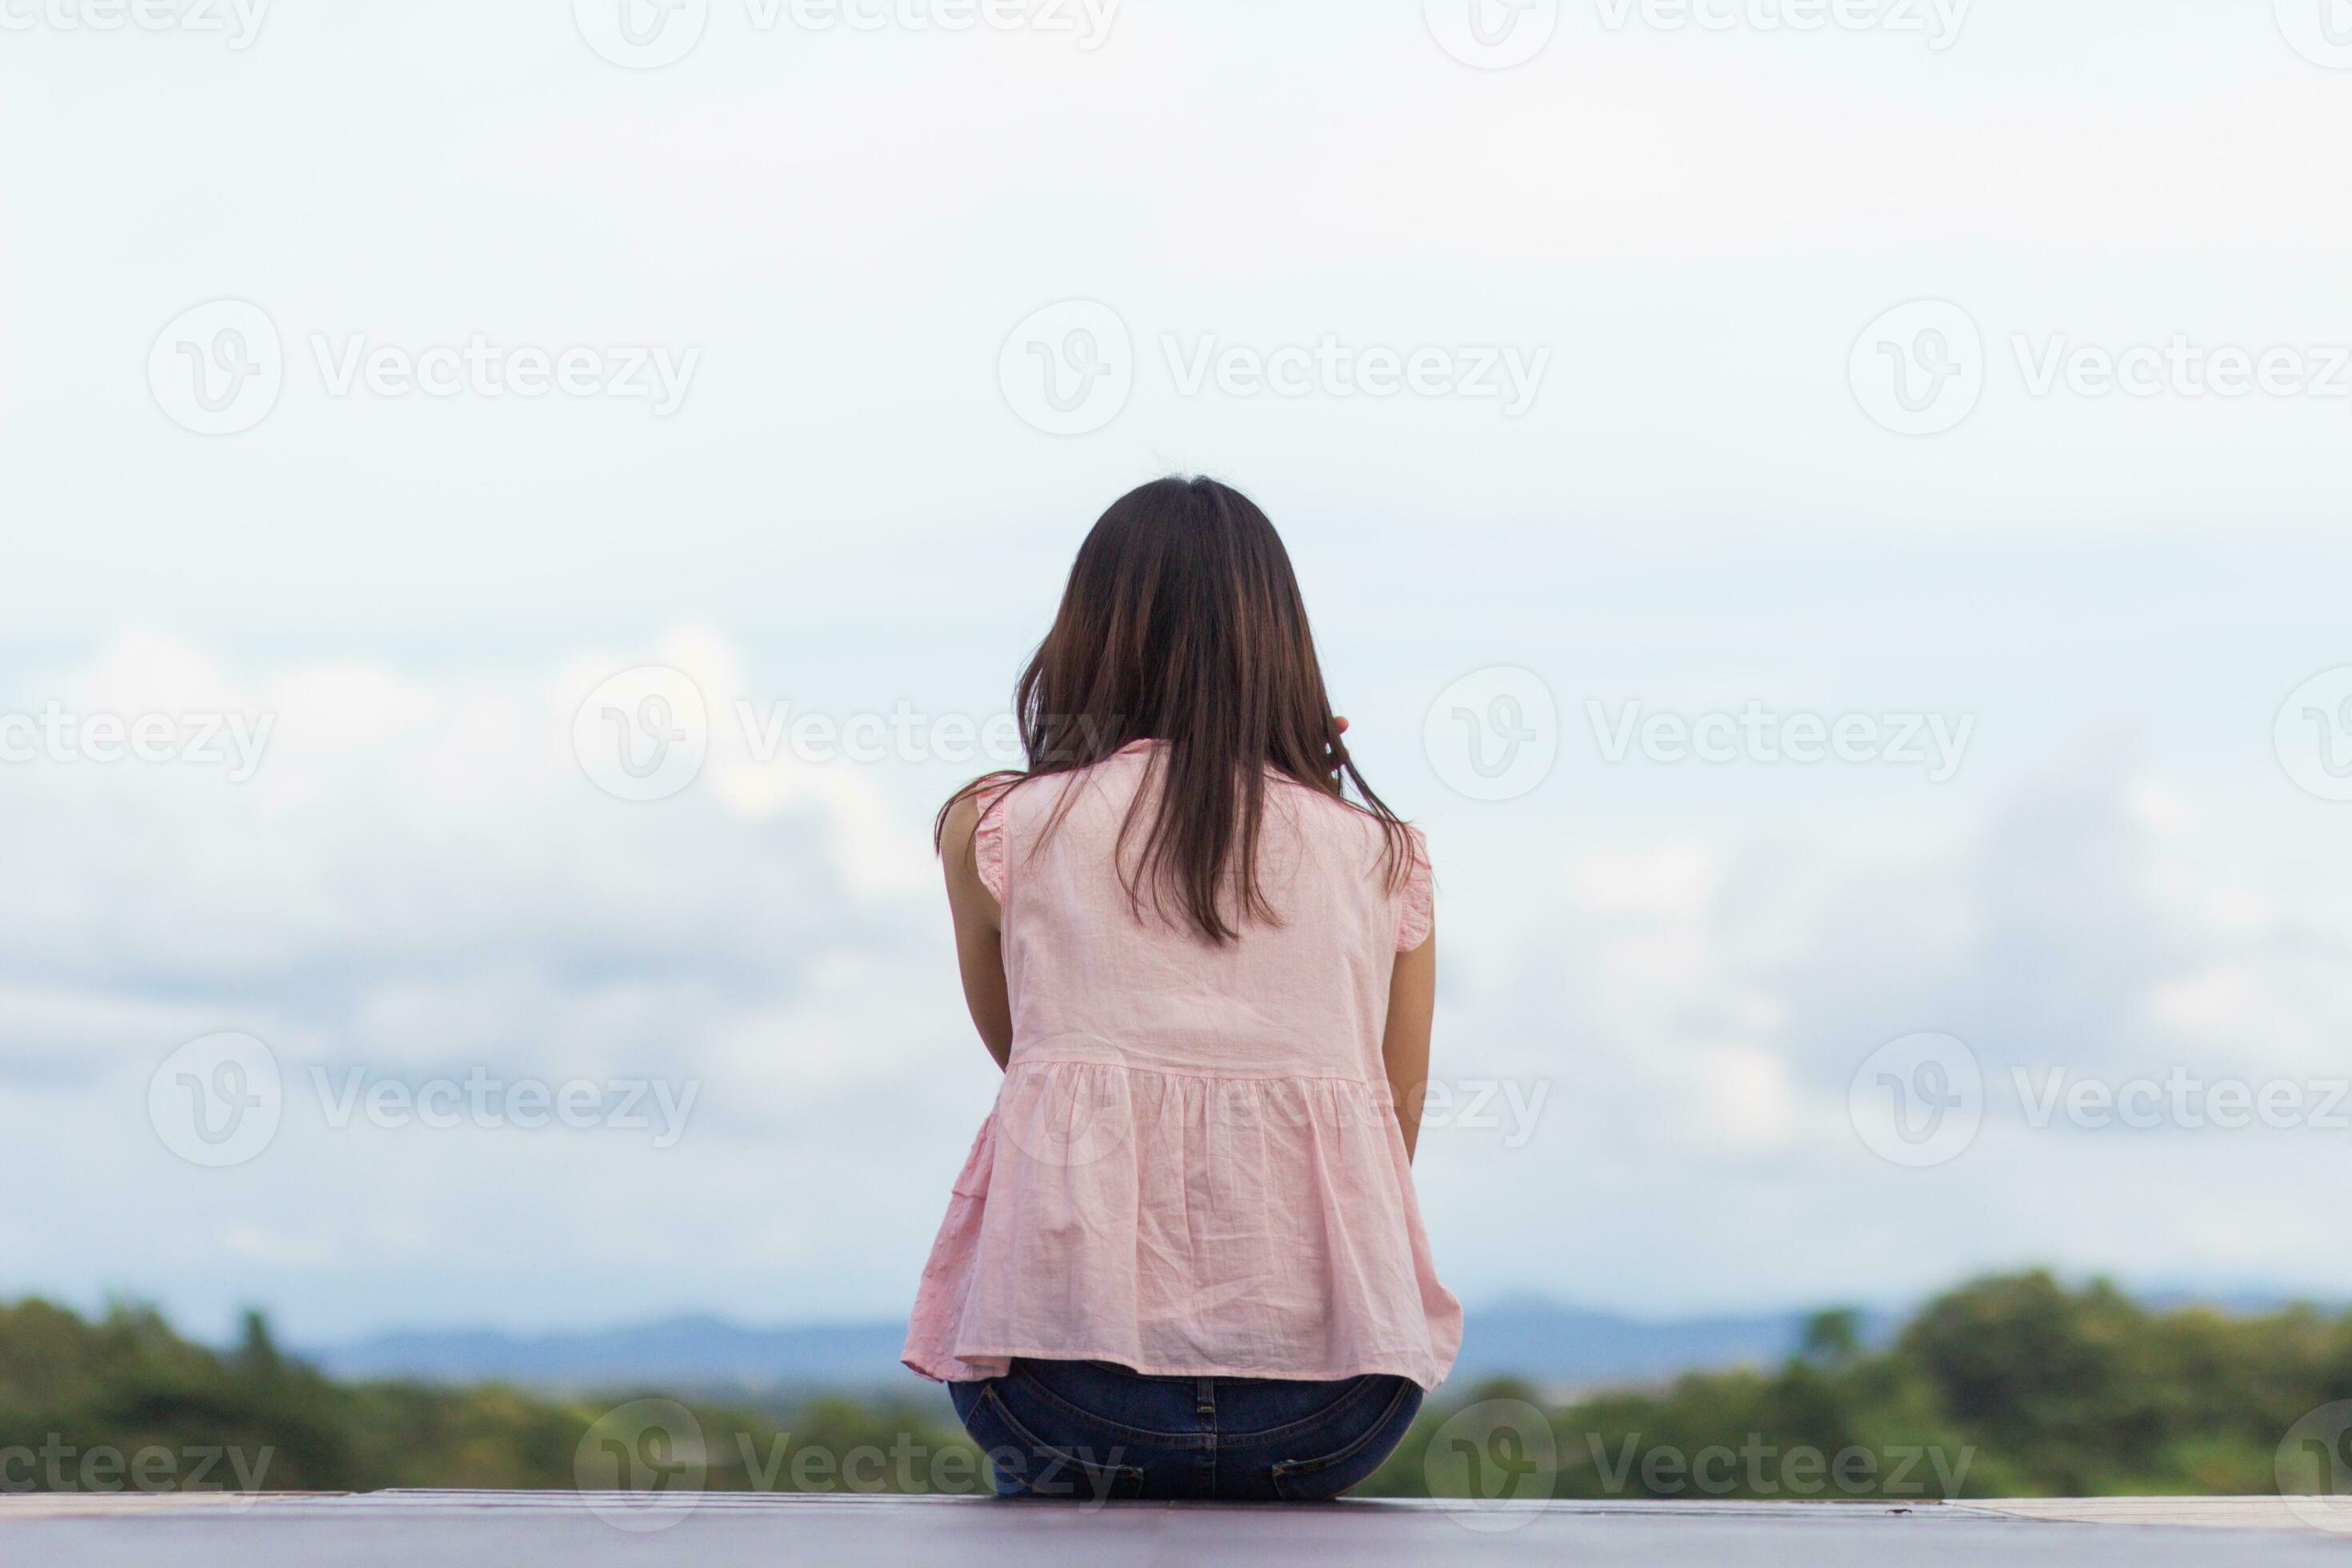 Back scene of woman alone with feeling lonely and depressed on